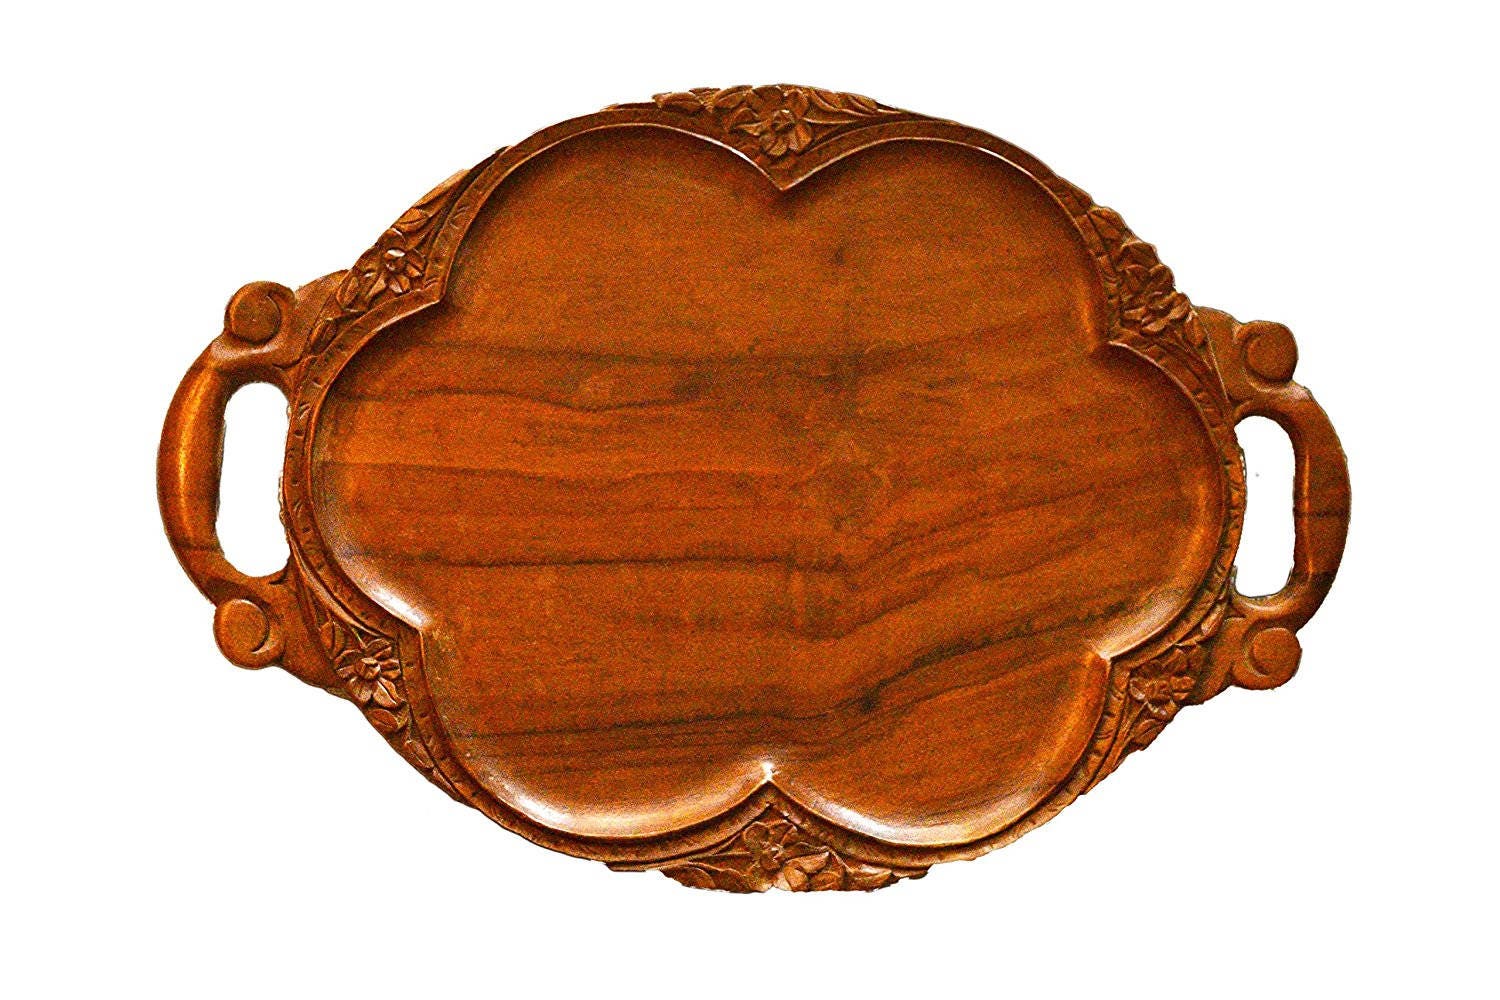 Handmade Wooden Serving Tray Antique Serving Tray Oval